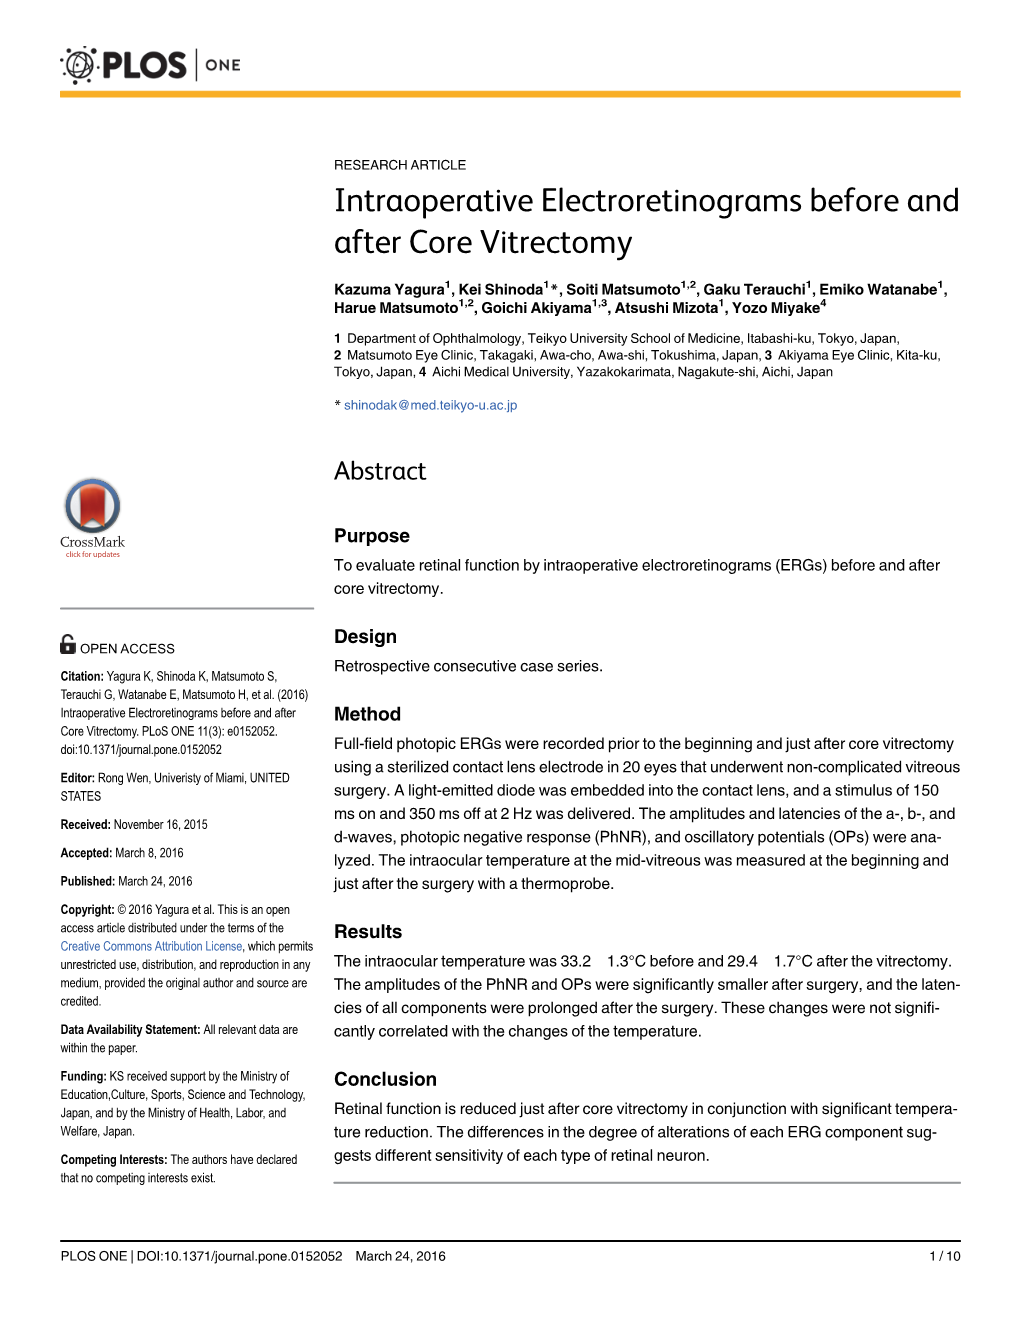 Intraoperative Electroretinograms Before and After Core Vitrectomy